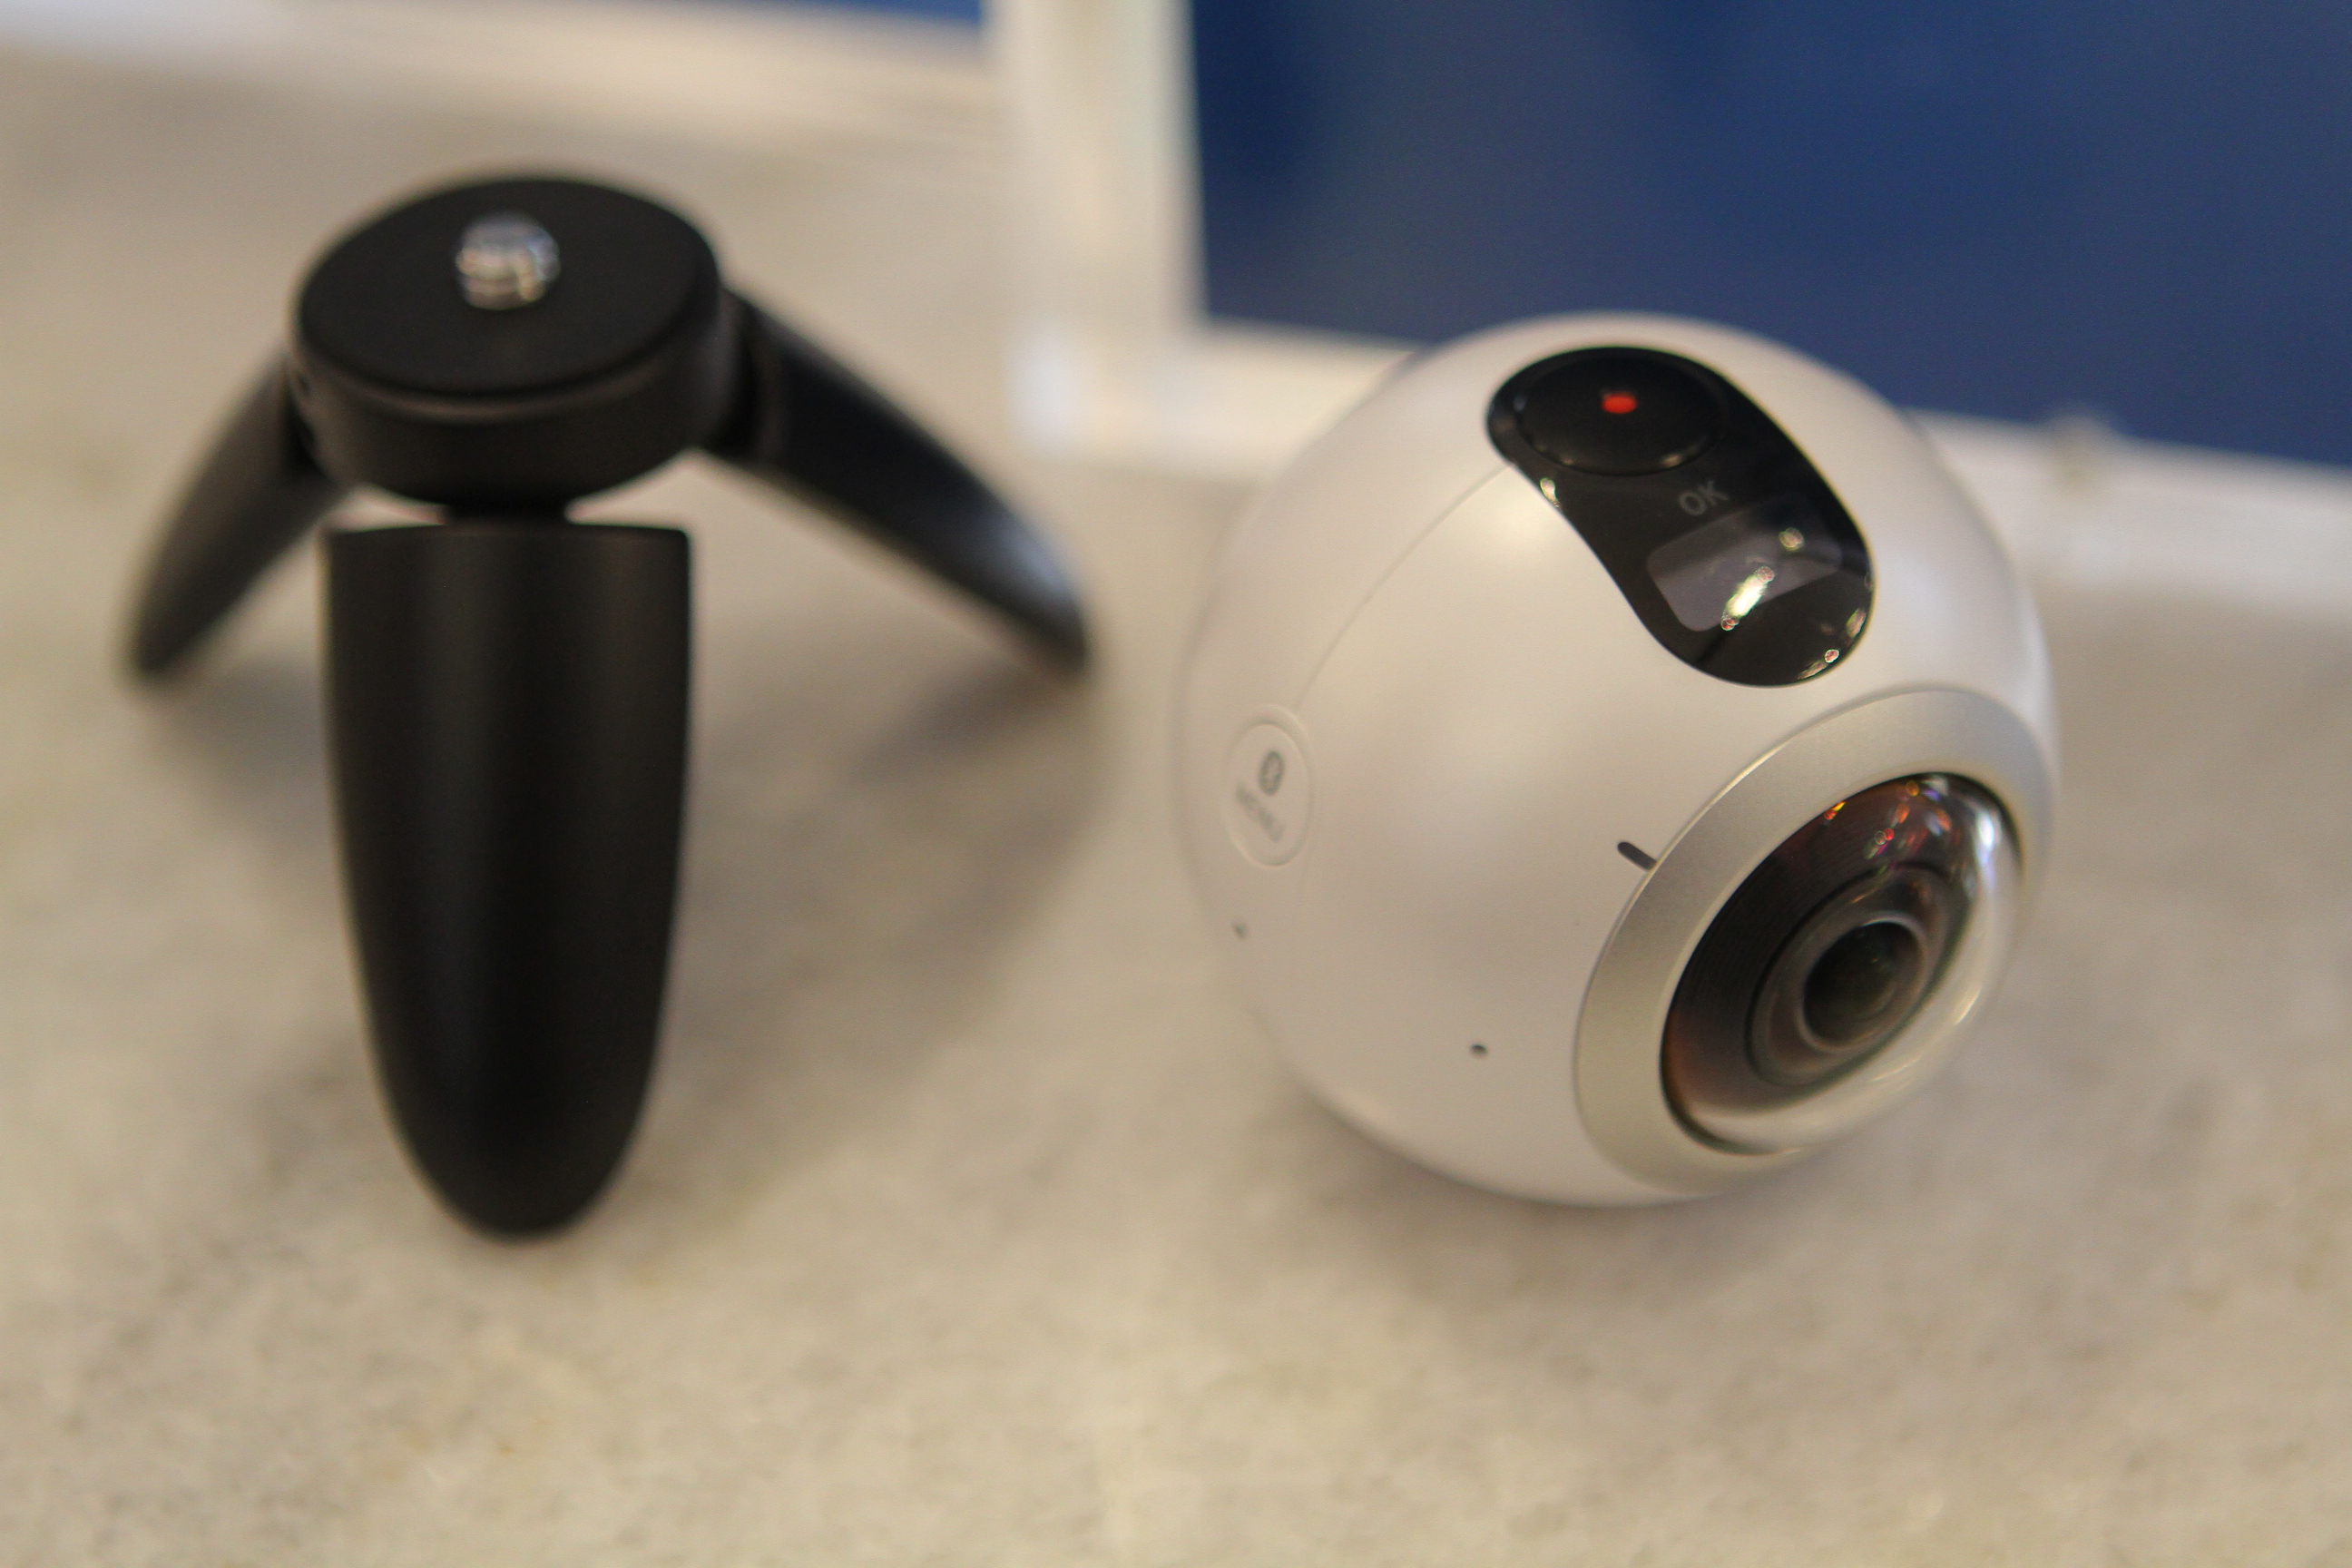 Samsung Gear 360 camera separated from its tripod mount.